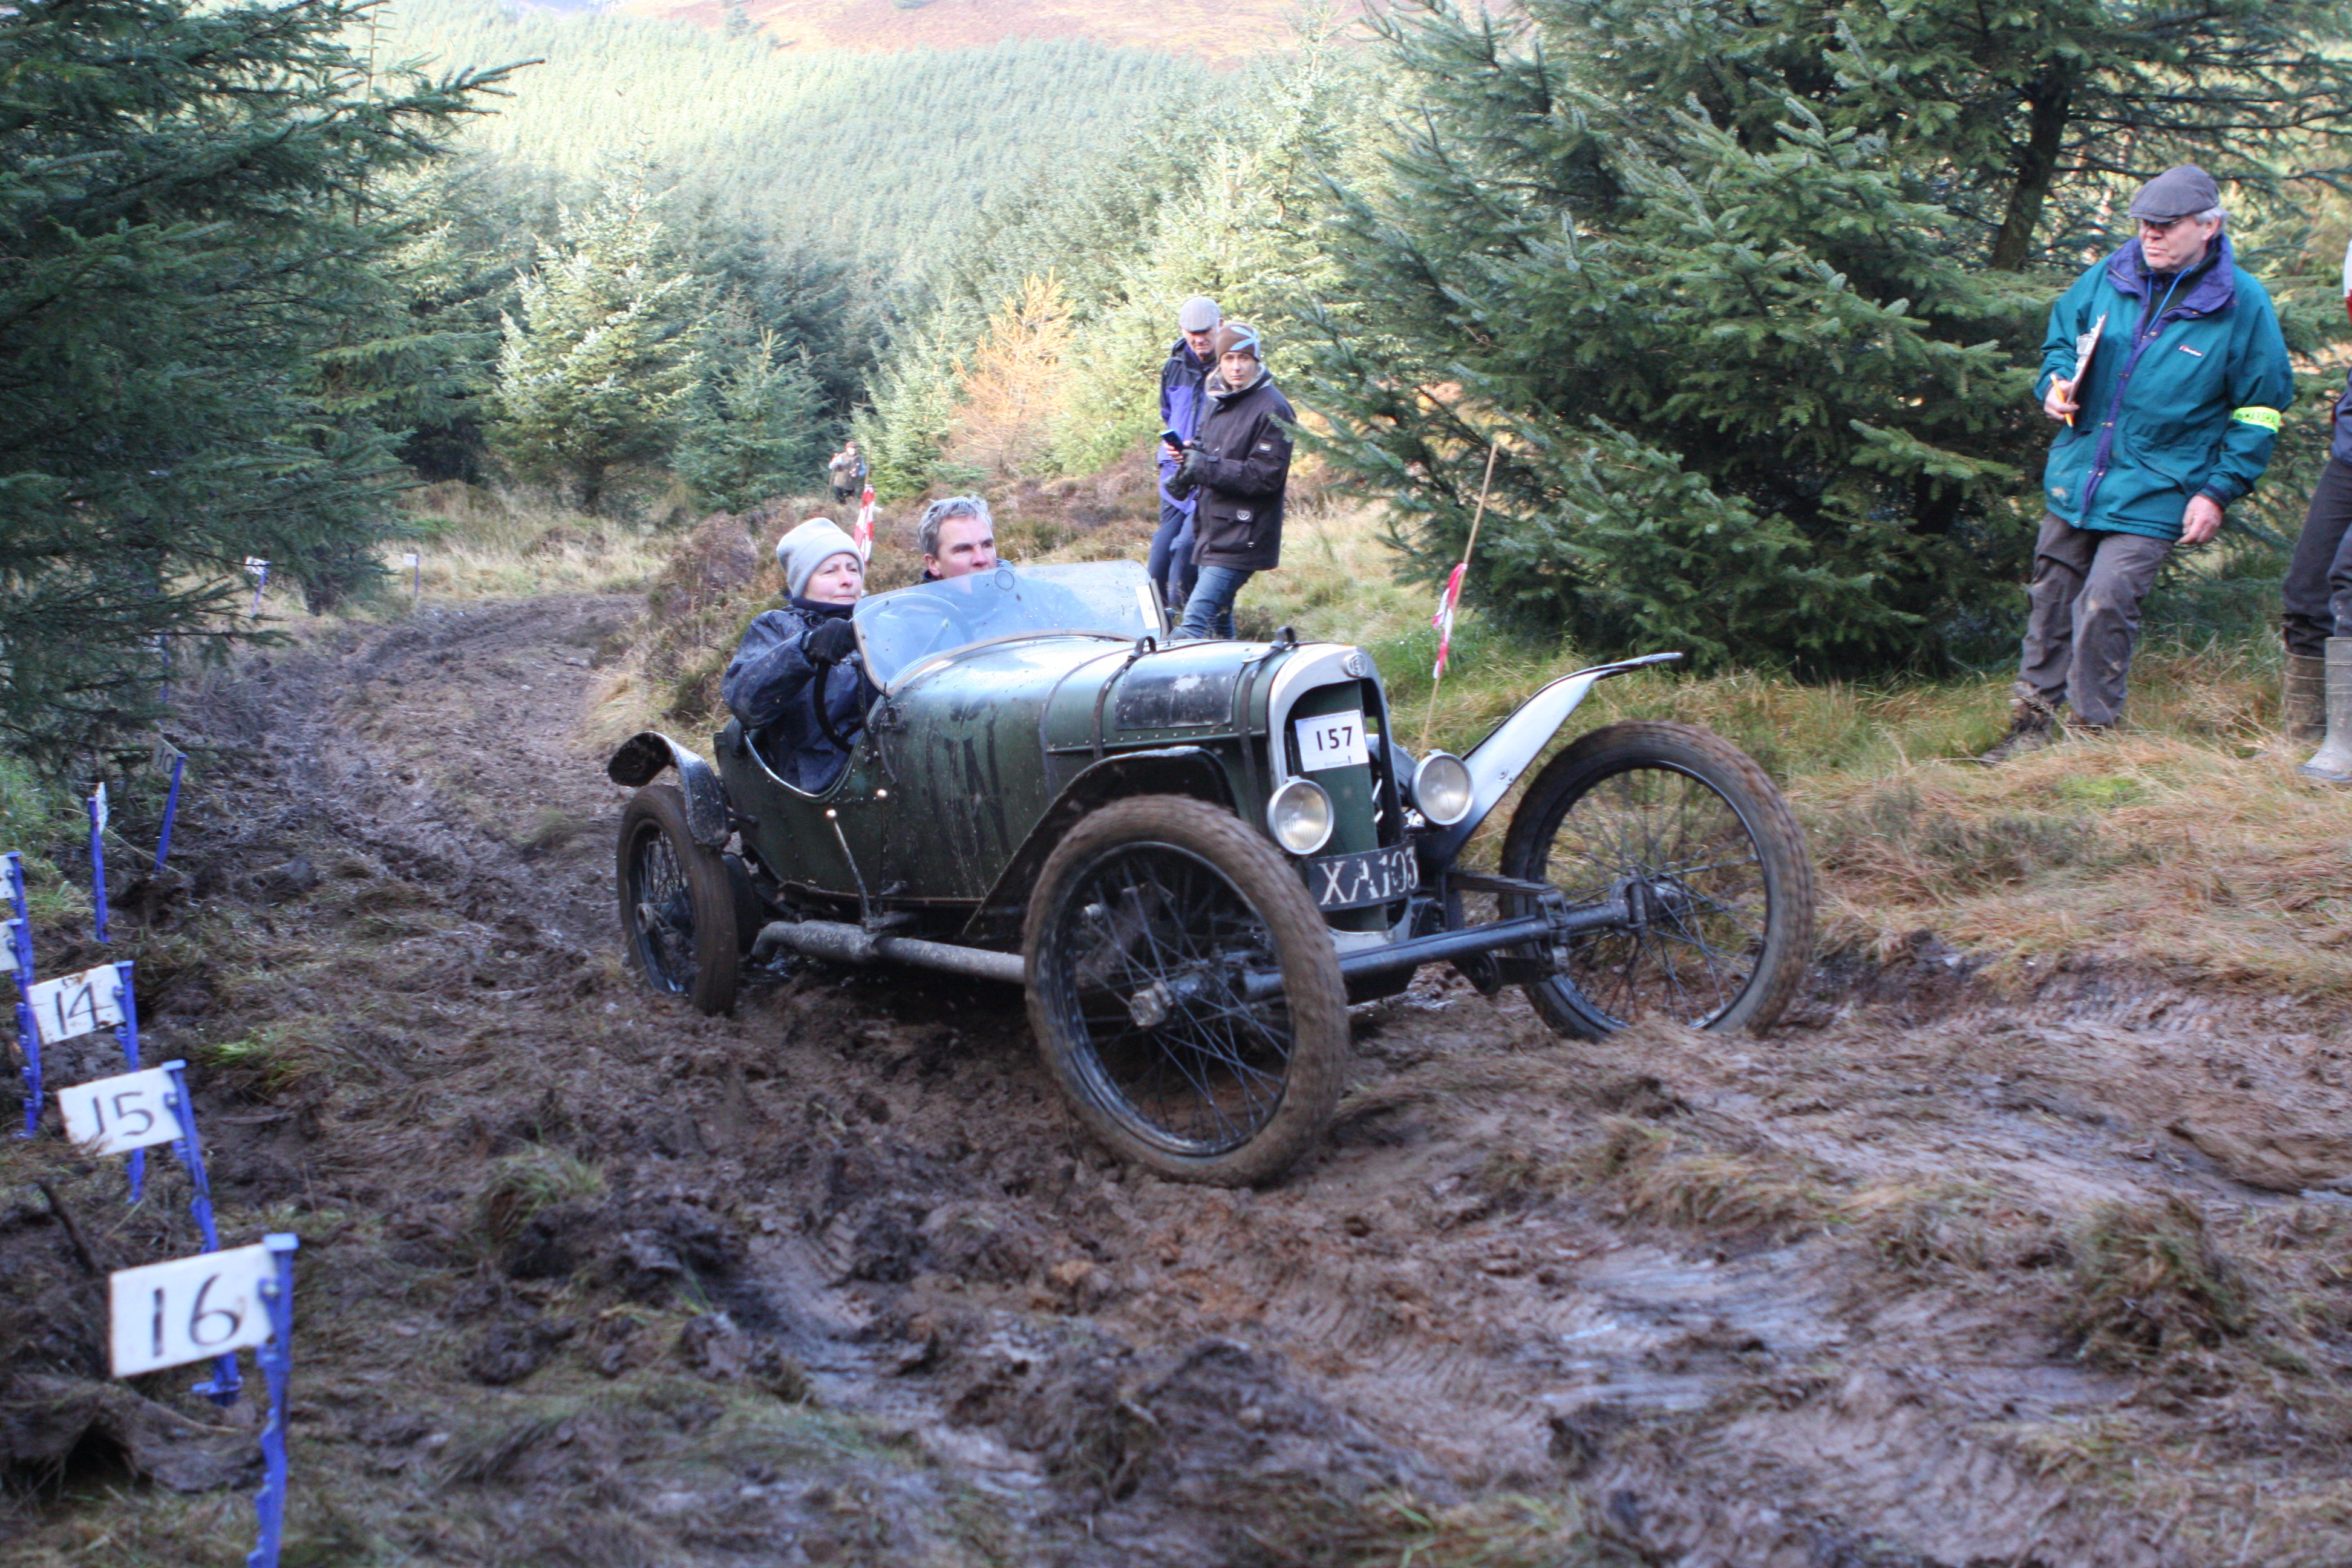 Capt. Bunting is crowned Queen of the VSCC Lakeland Trial once more cover